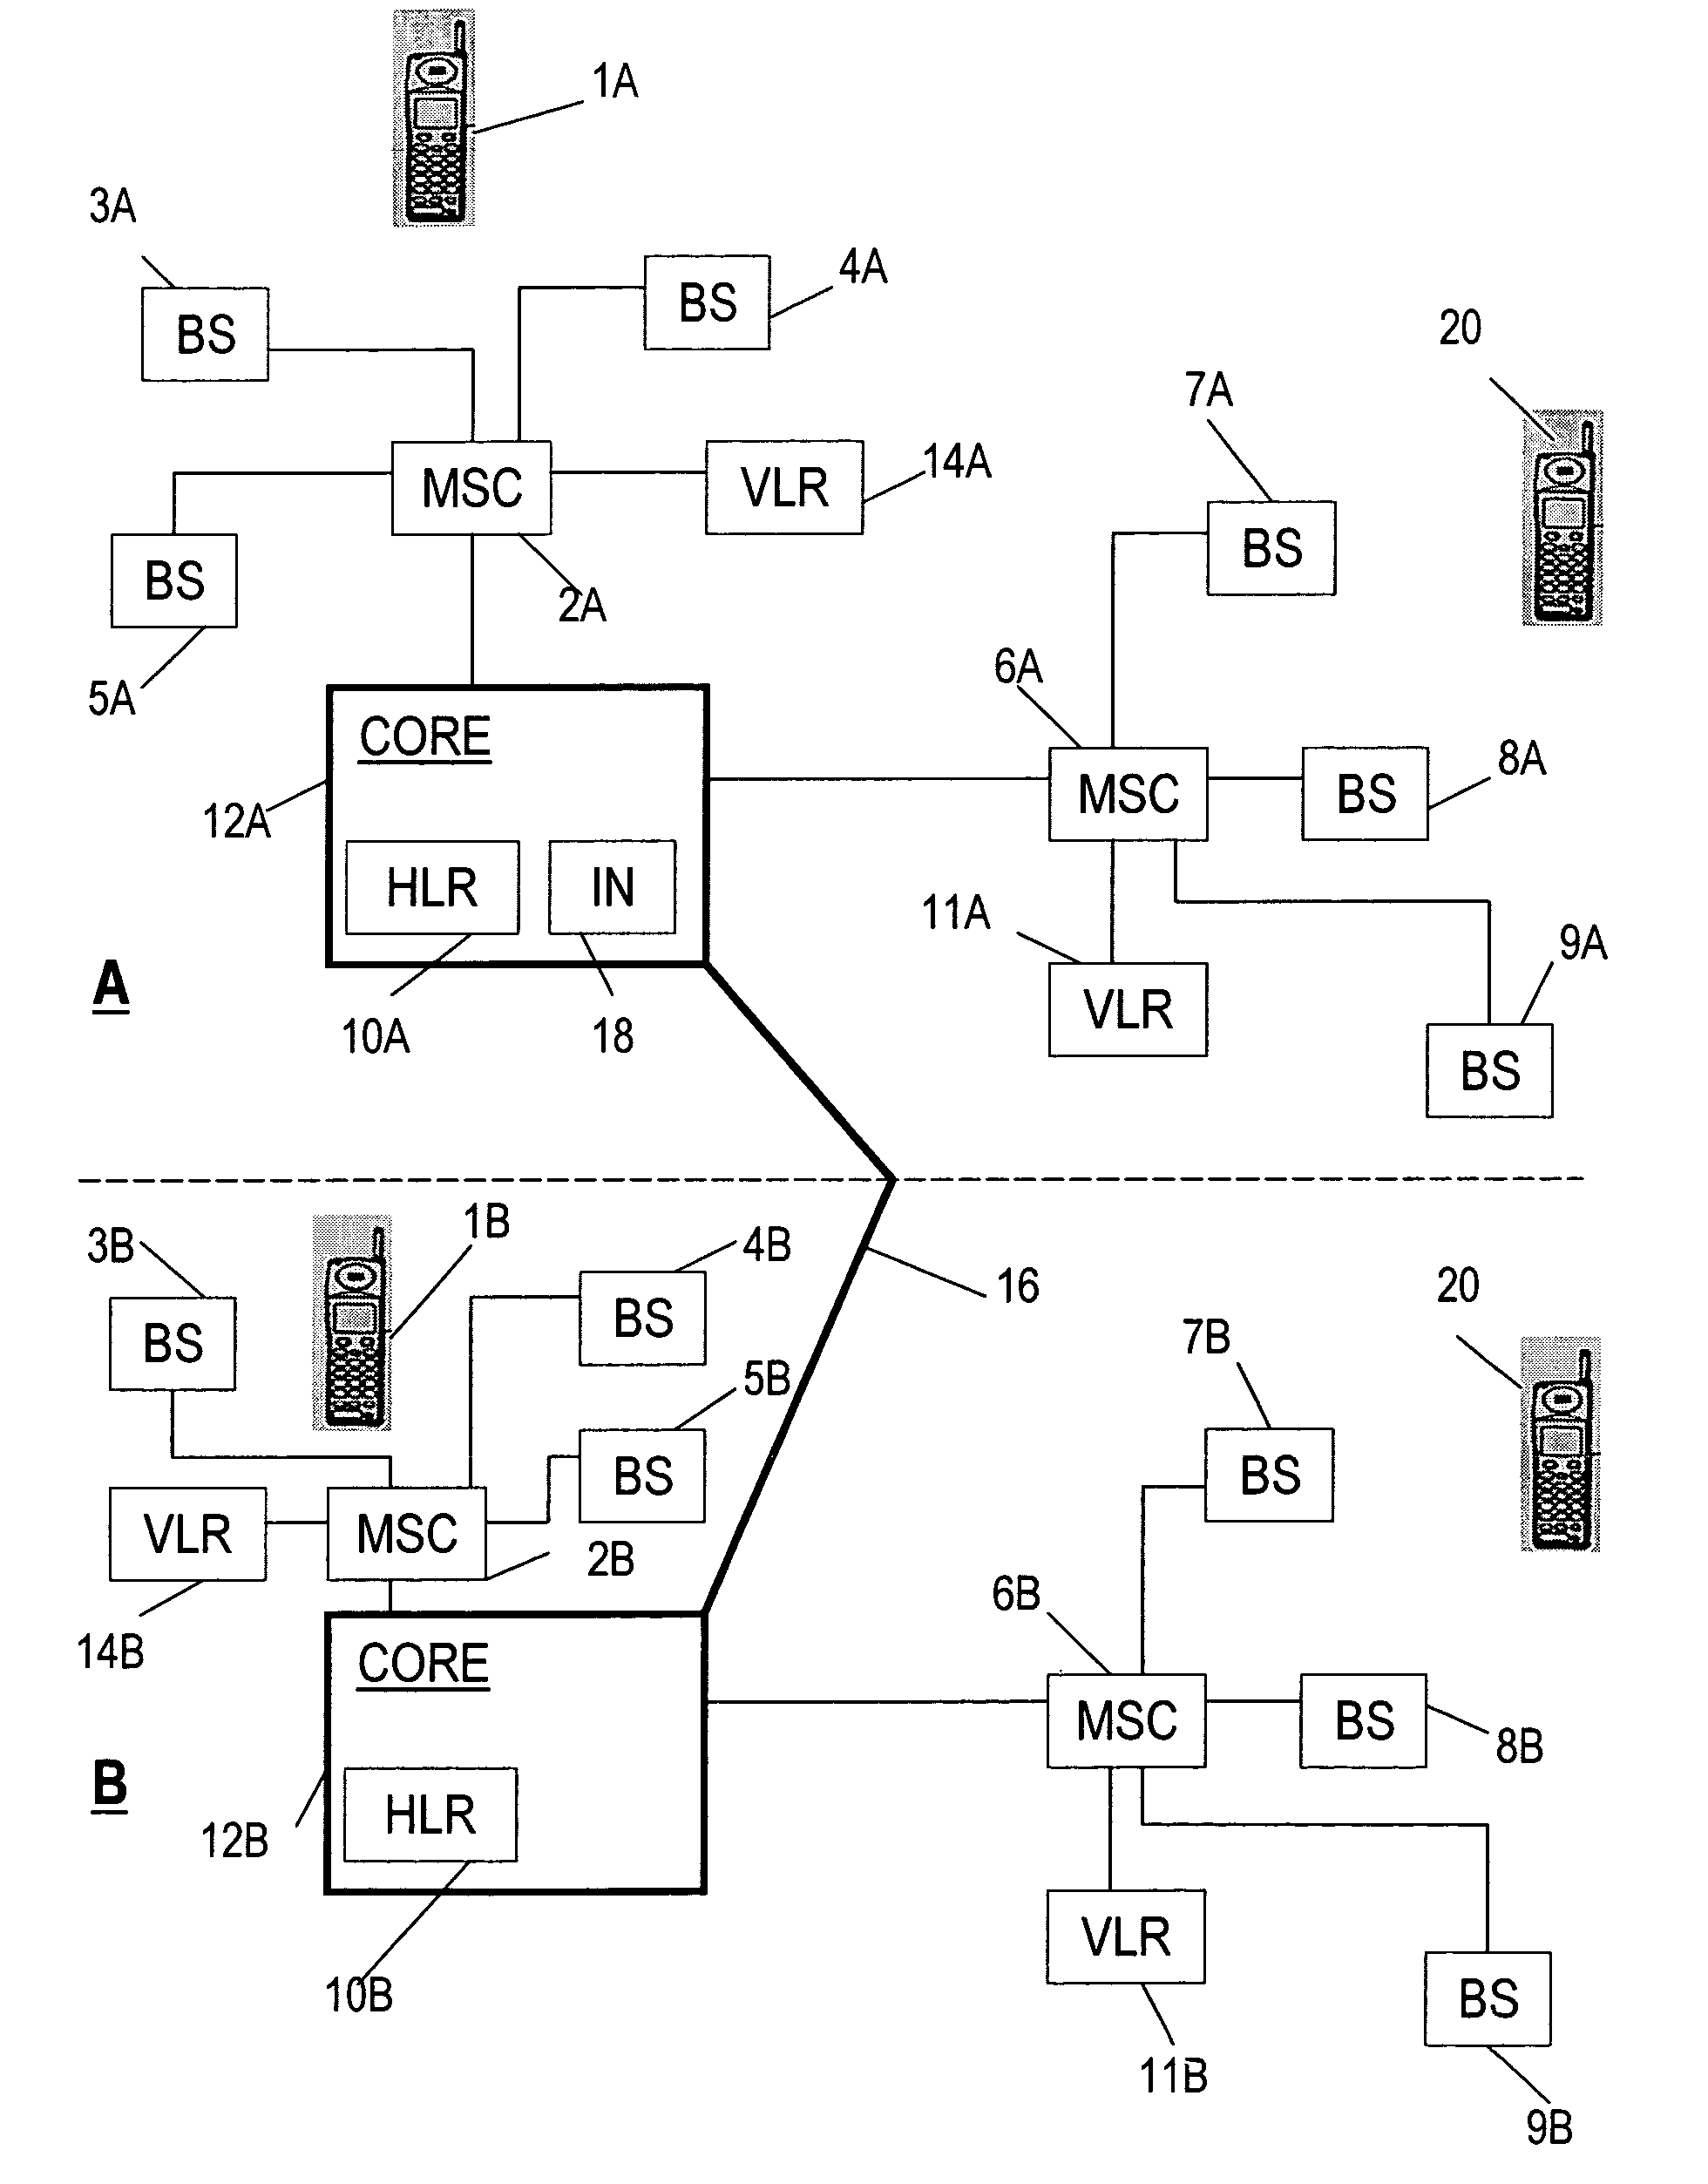 Network communication system including a database of codes and corresponding telephone numbers